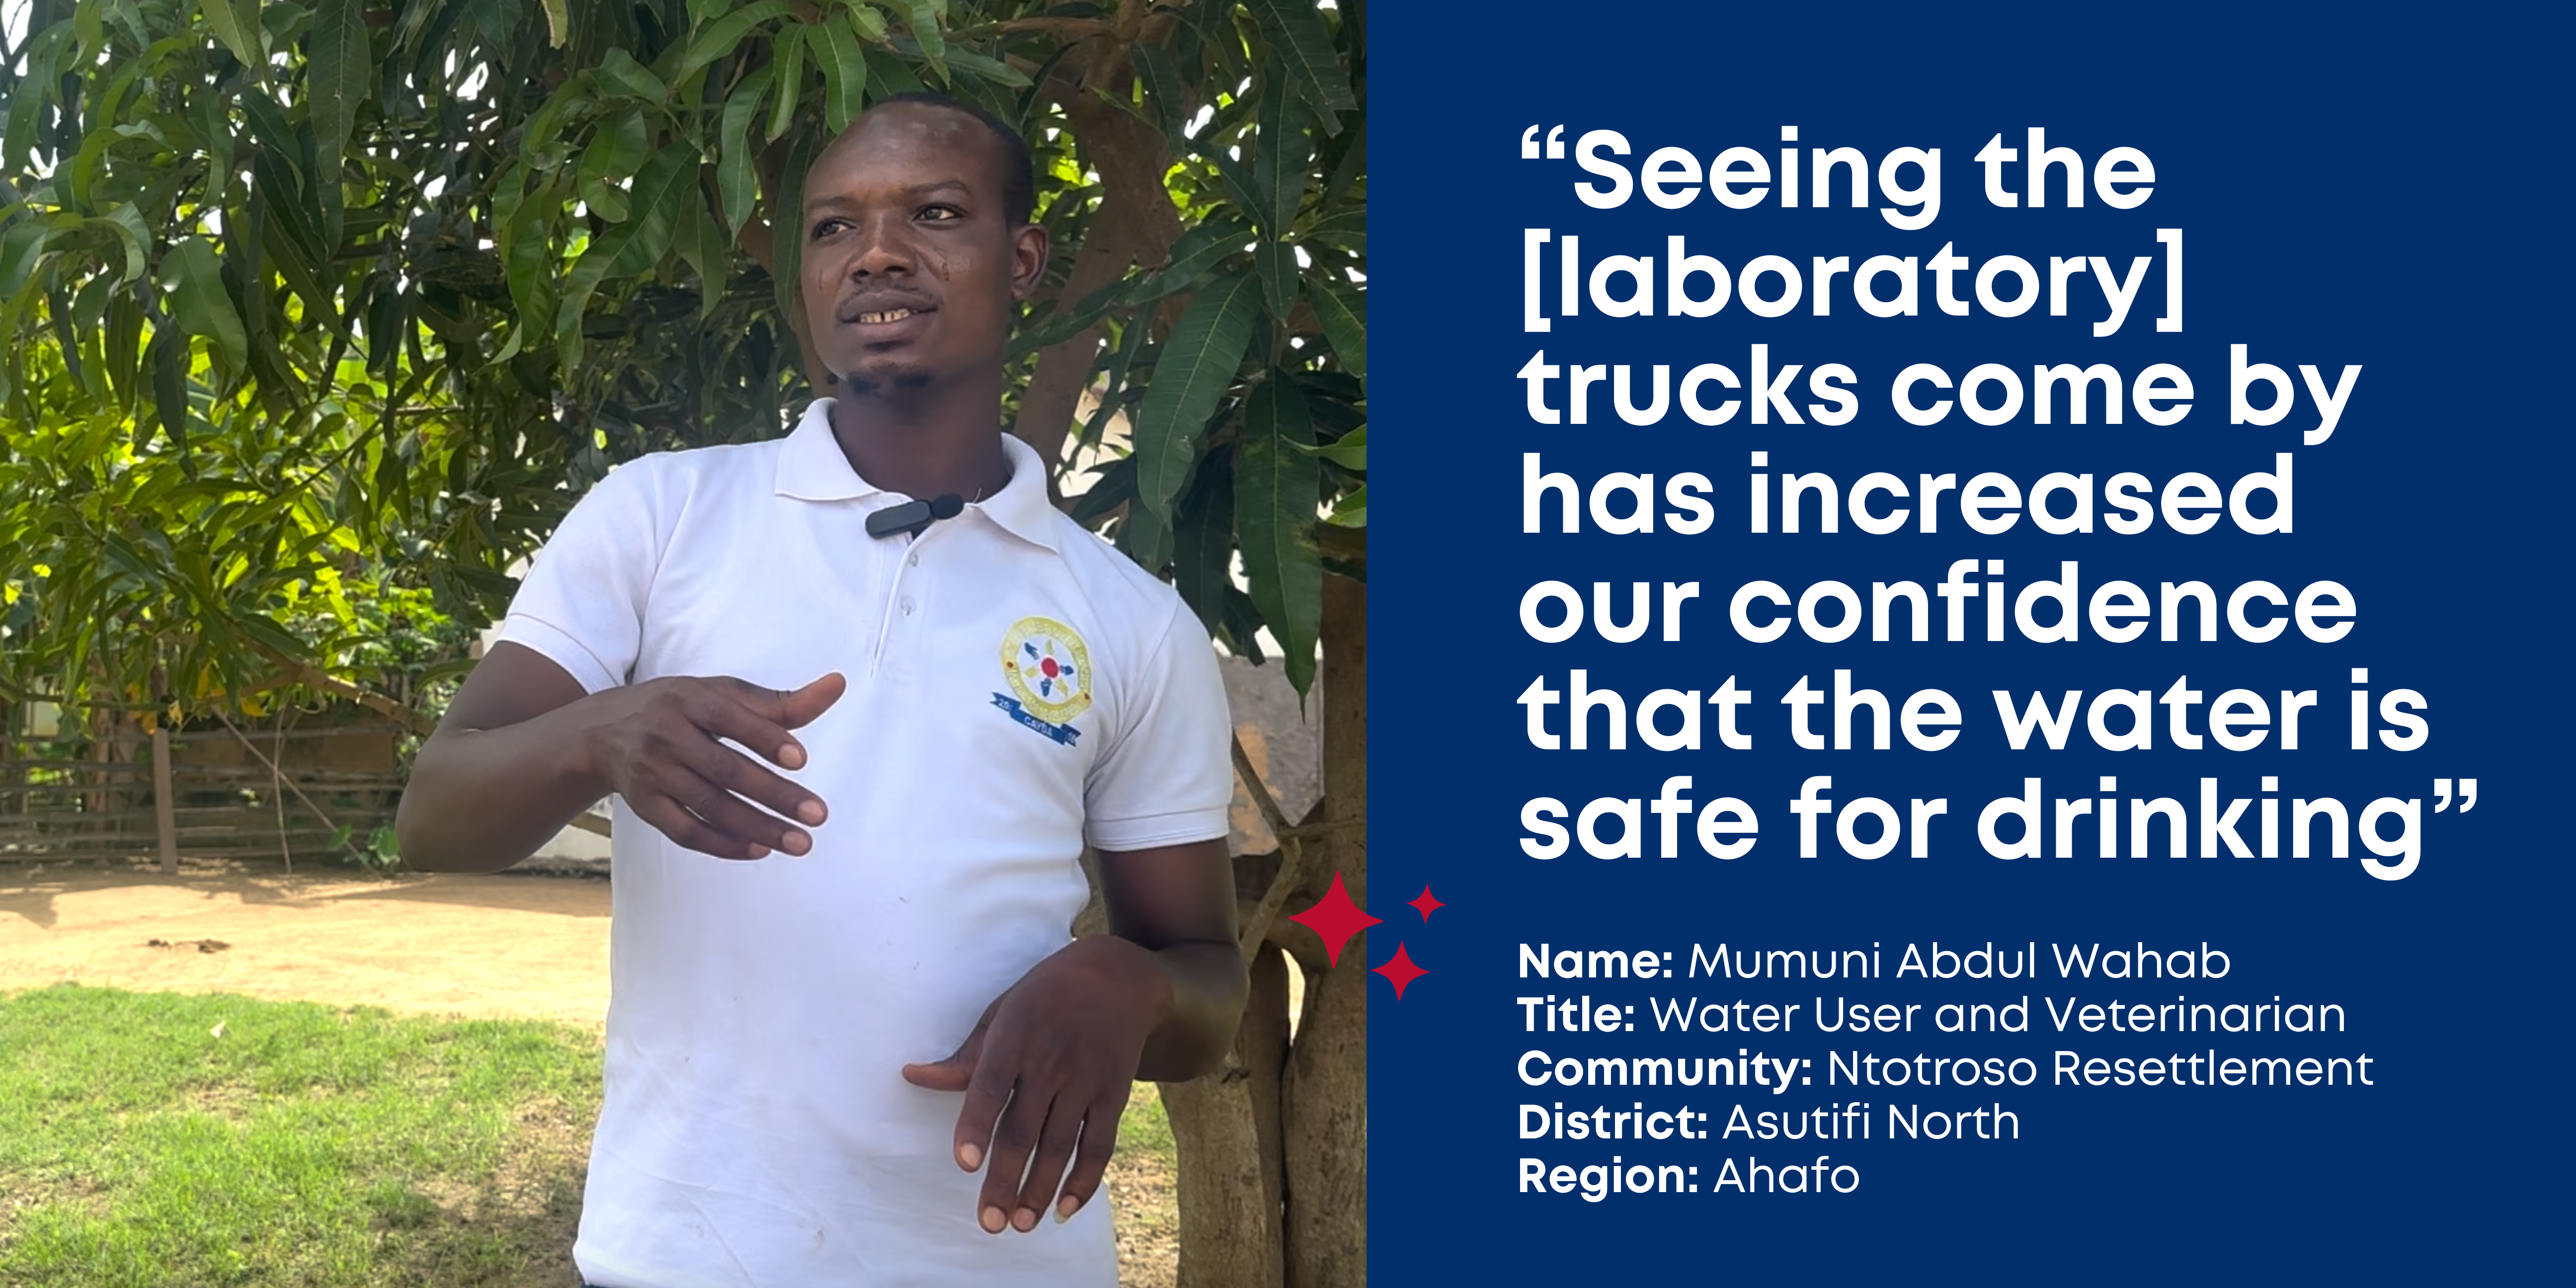 Mumuni Abdul Wahab, a veterinarian, stands under a tree wearing a white polo shirt and gestures with his hands. "Seeing the [laboratory] trucks come by has increased confidence that water is safe for drinking." Asutifi North, Ahafo, Ghana